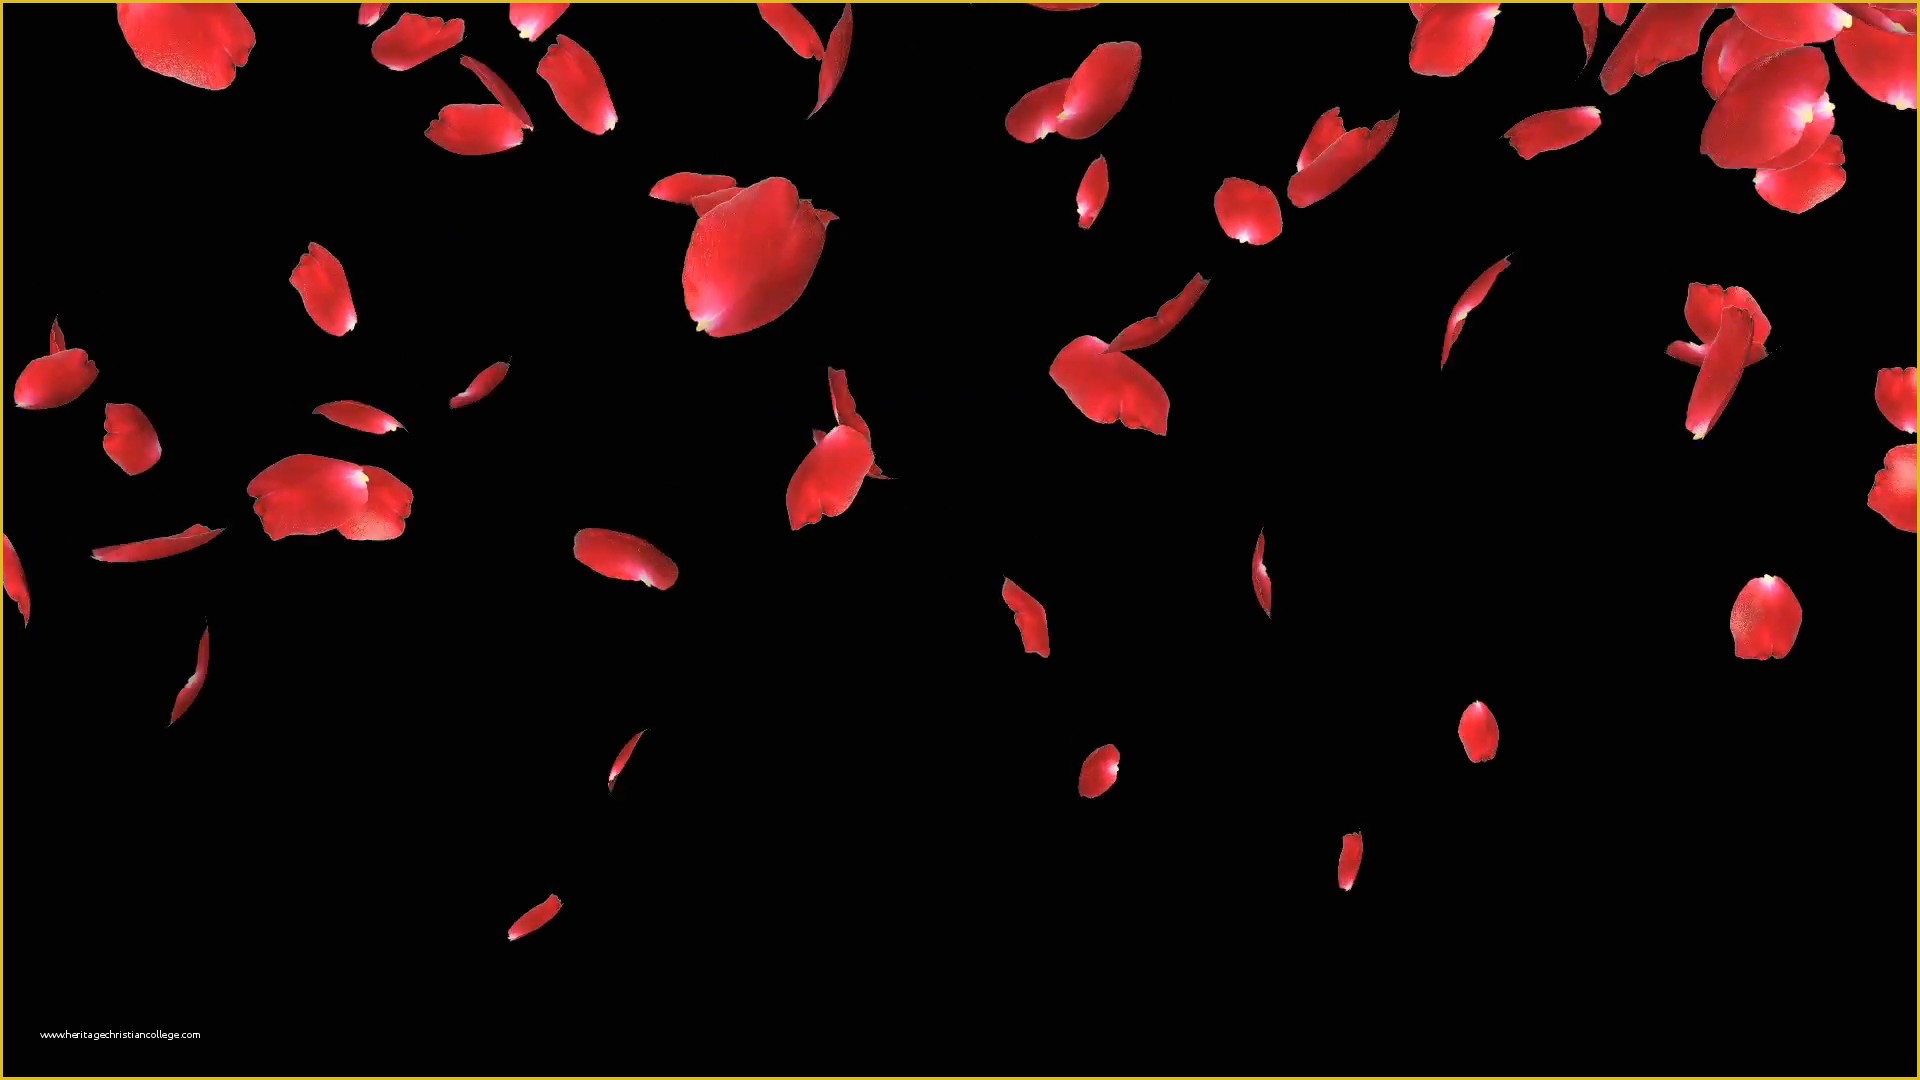 Falling Flower Petals after Effects Template Free Of Rose Petals Falling Against Black Stock Video Footage